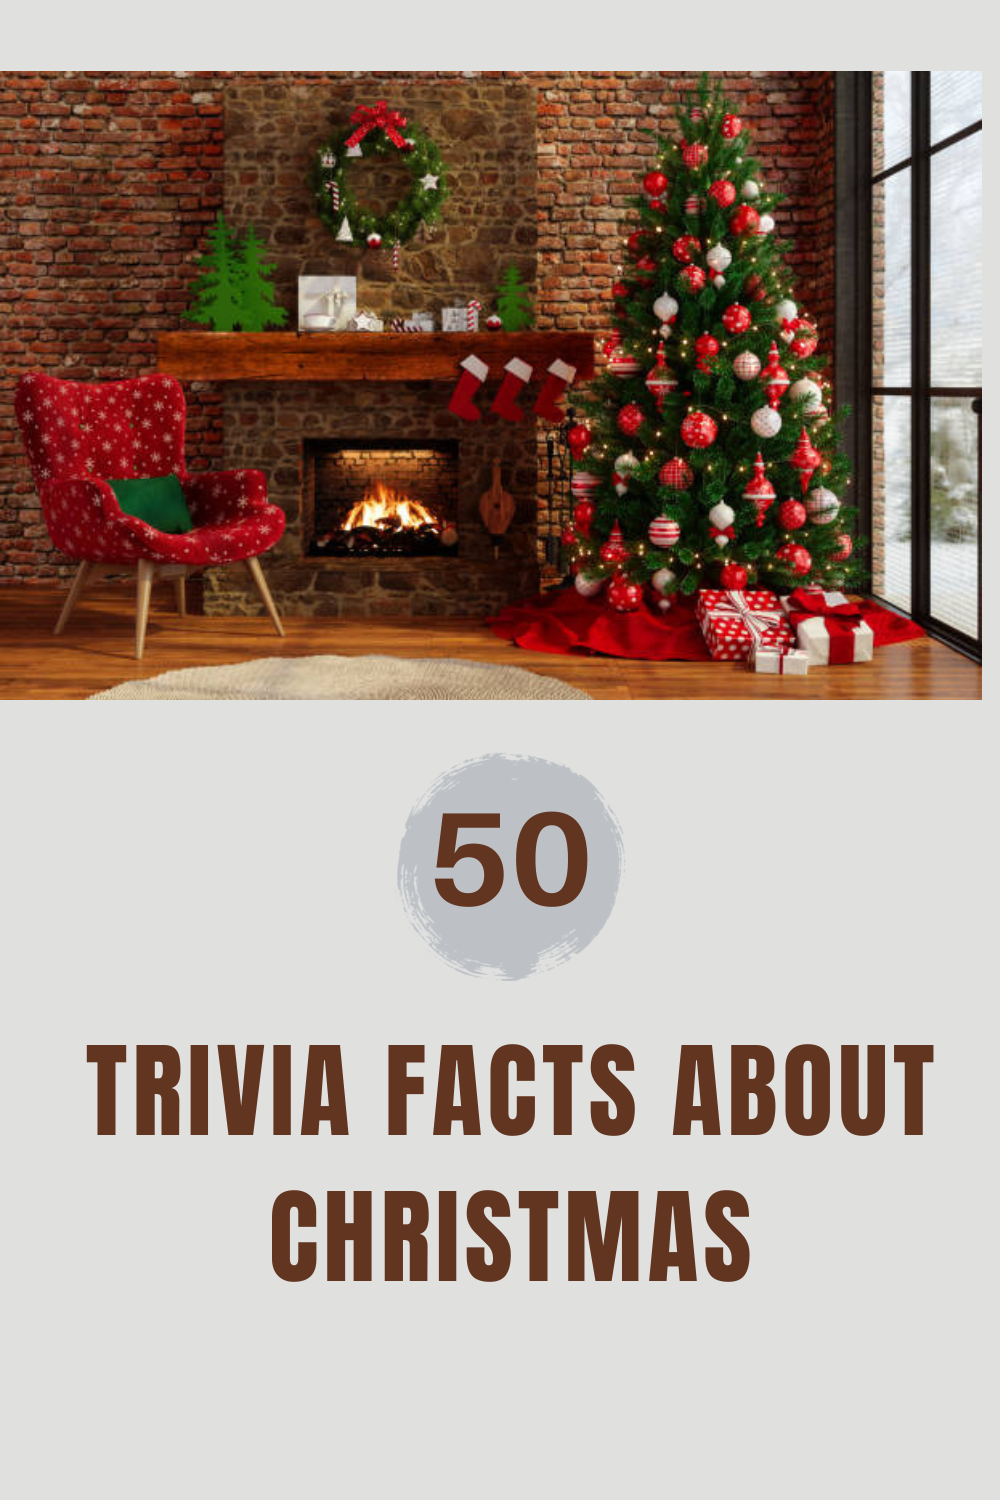 Trivia Facts about Christmas